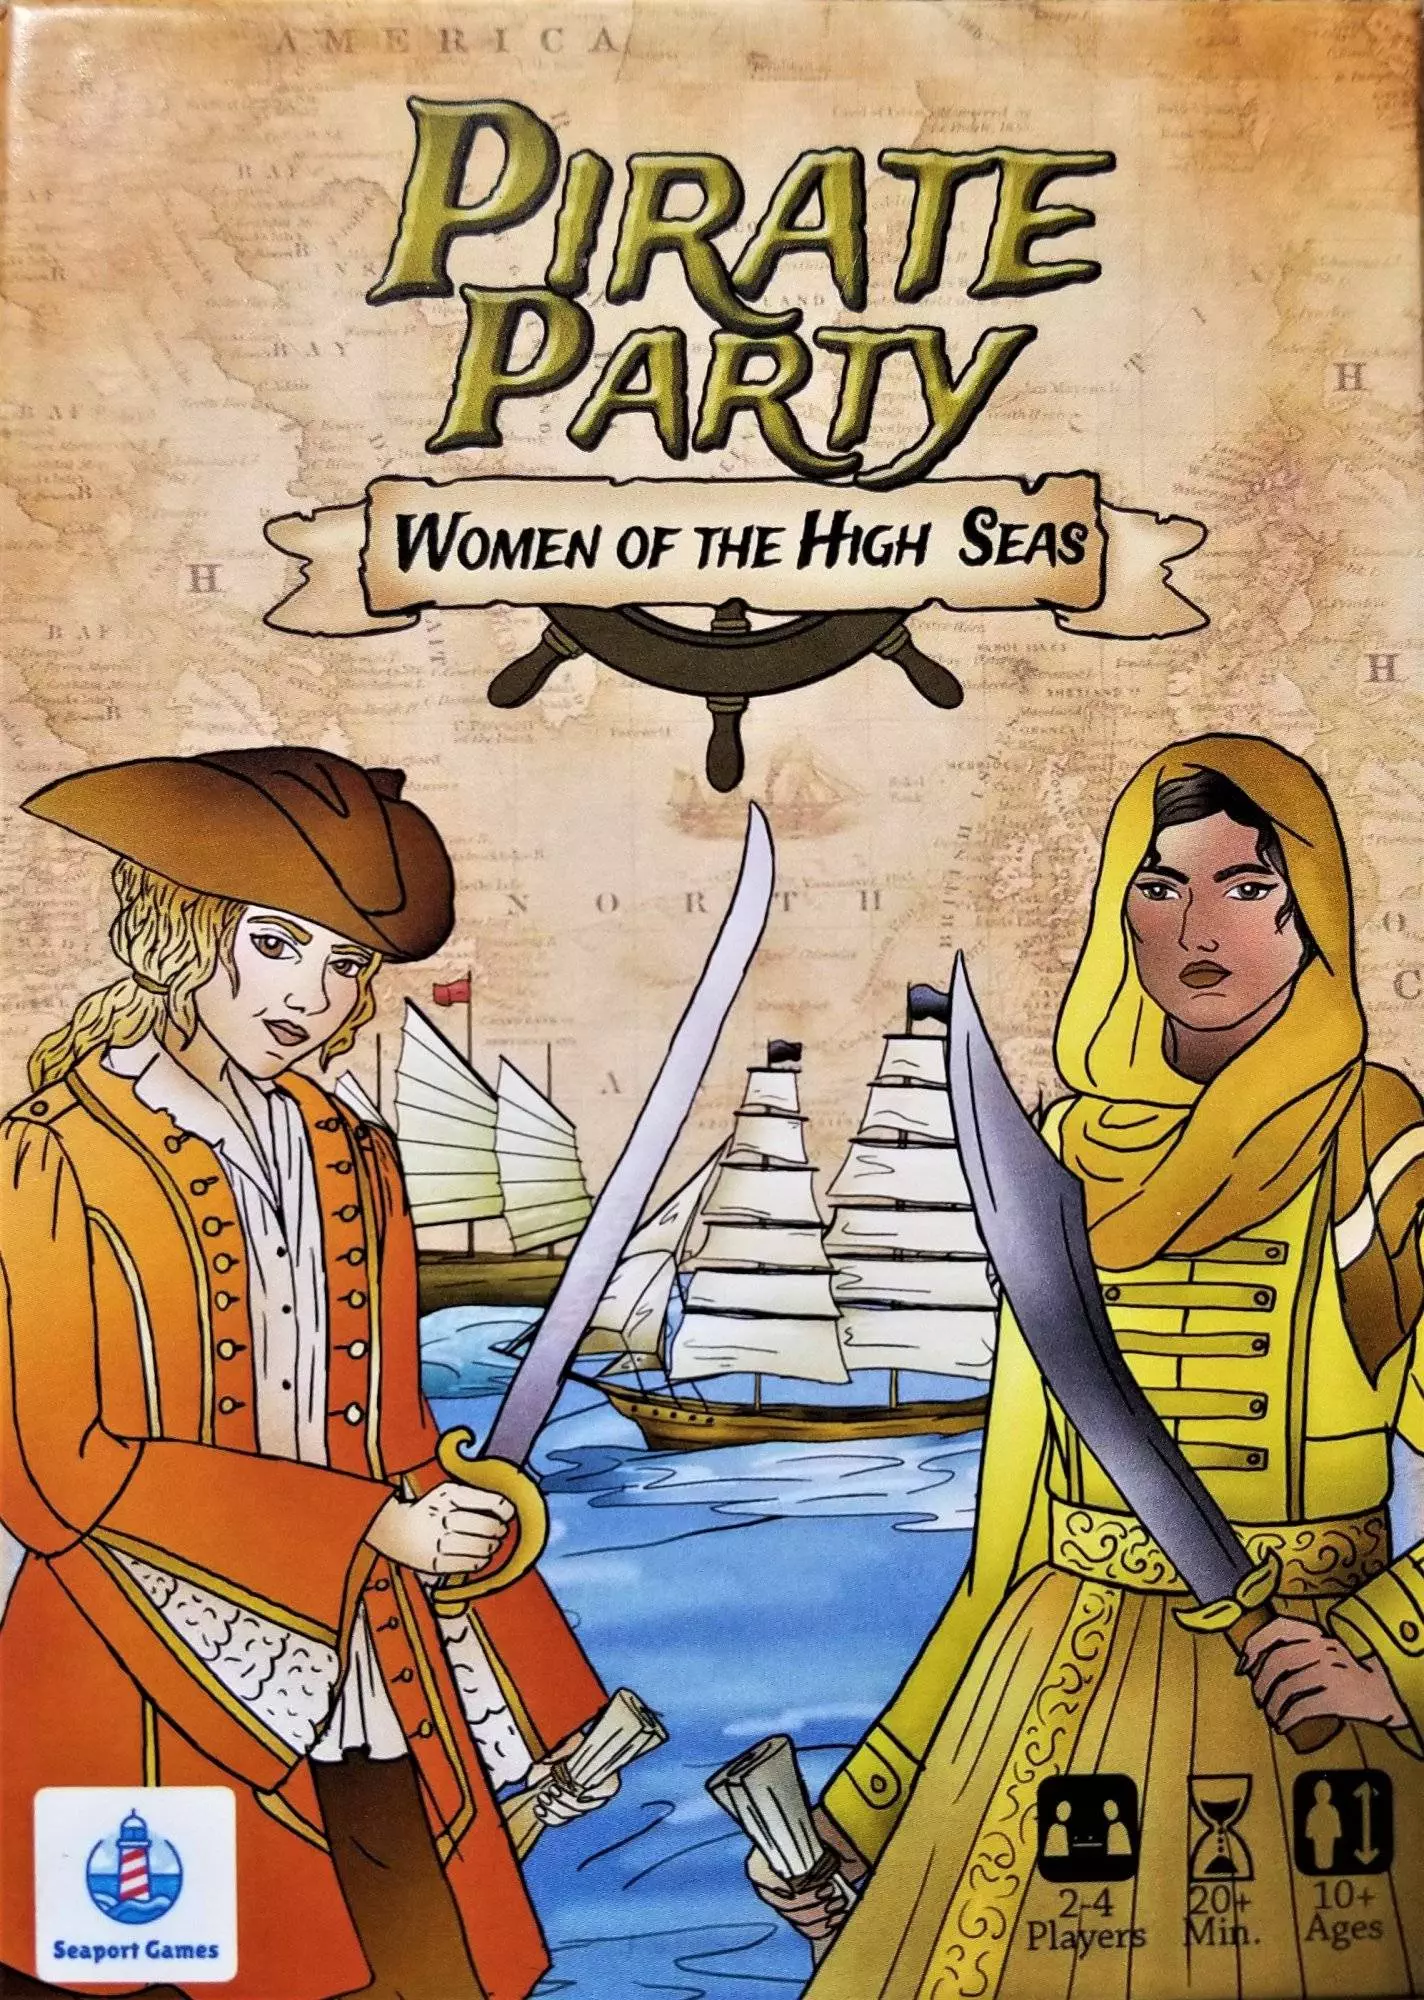 Pirate Party: Women of the High Seas